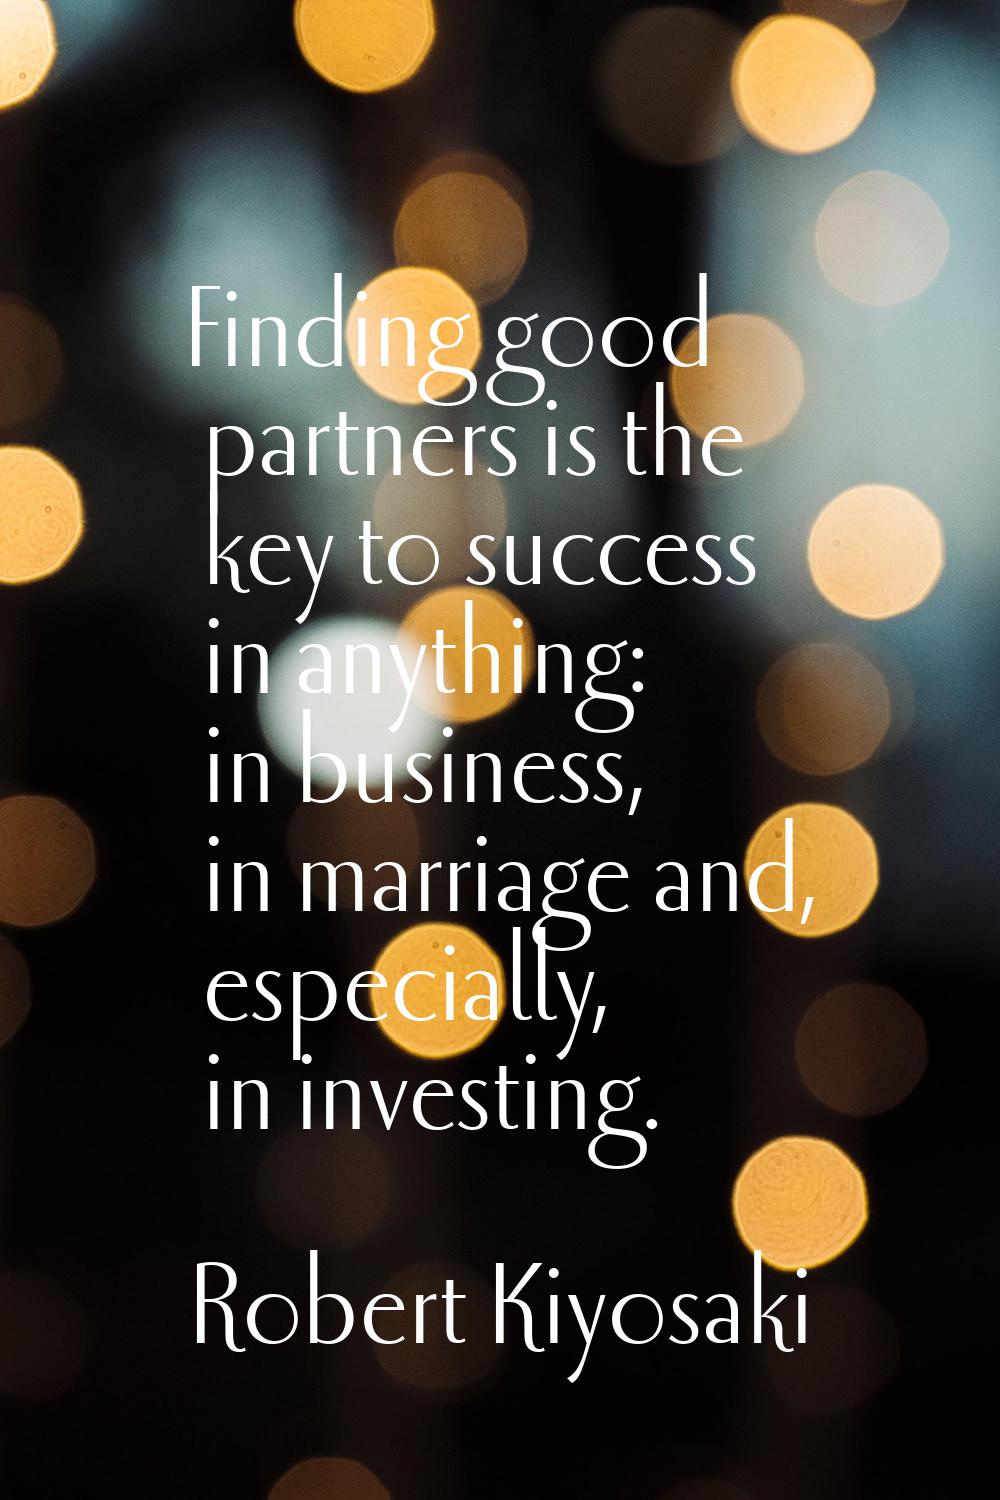 Finding good partners is the key to success in anything: in business, in marriage and, especially, 